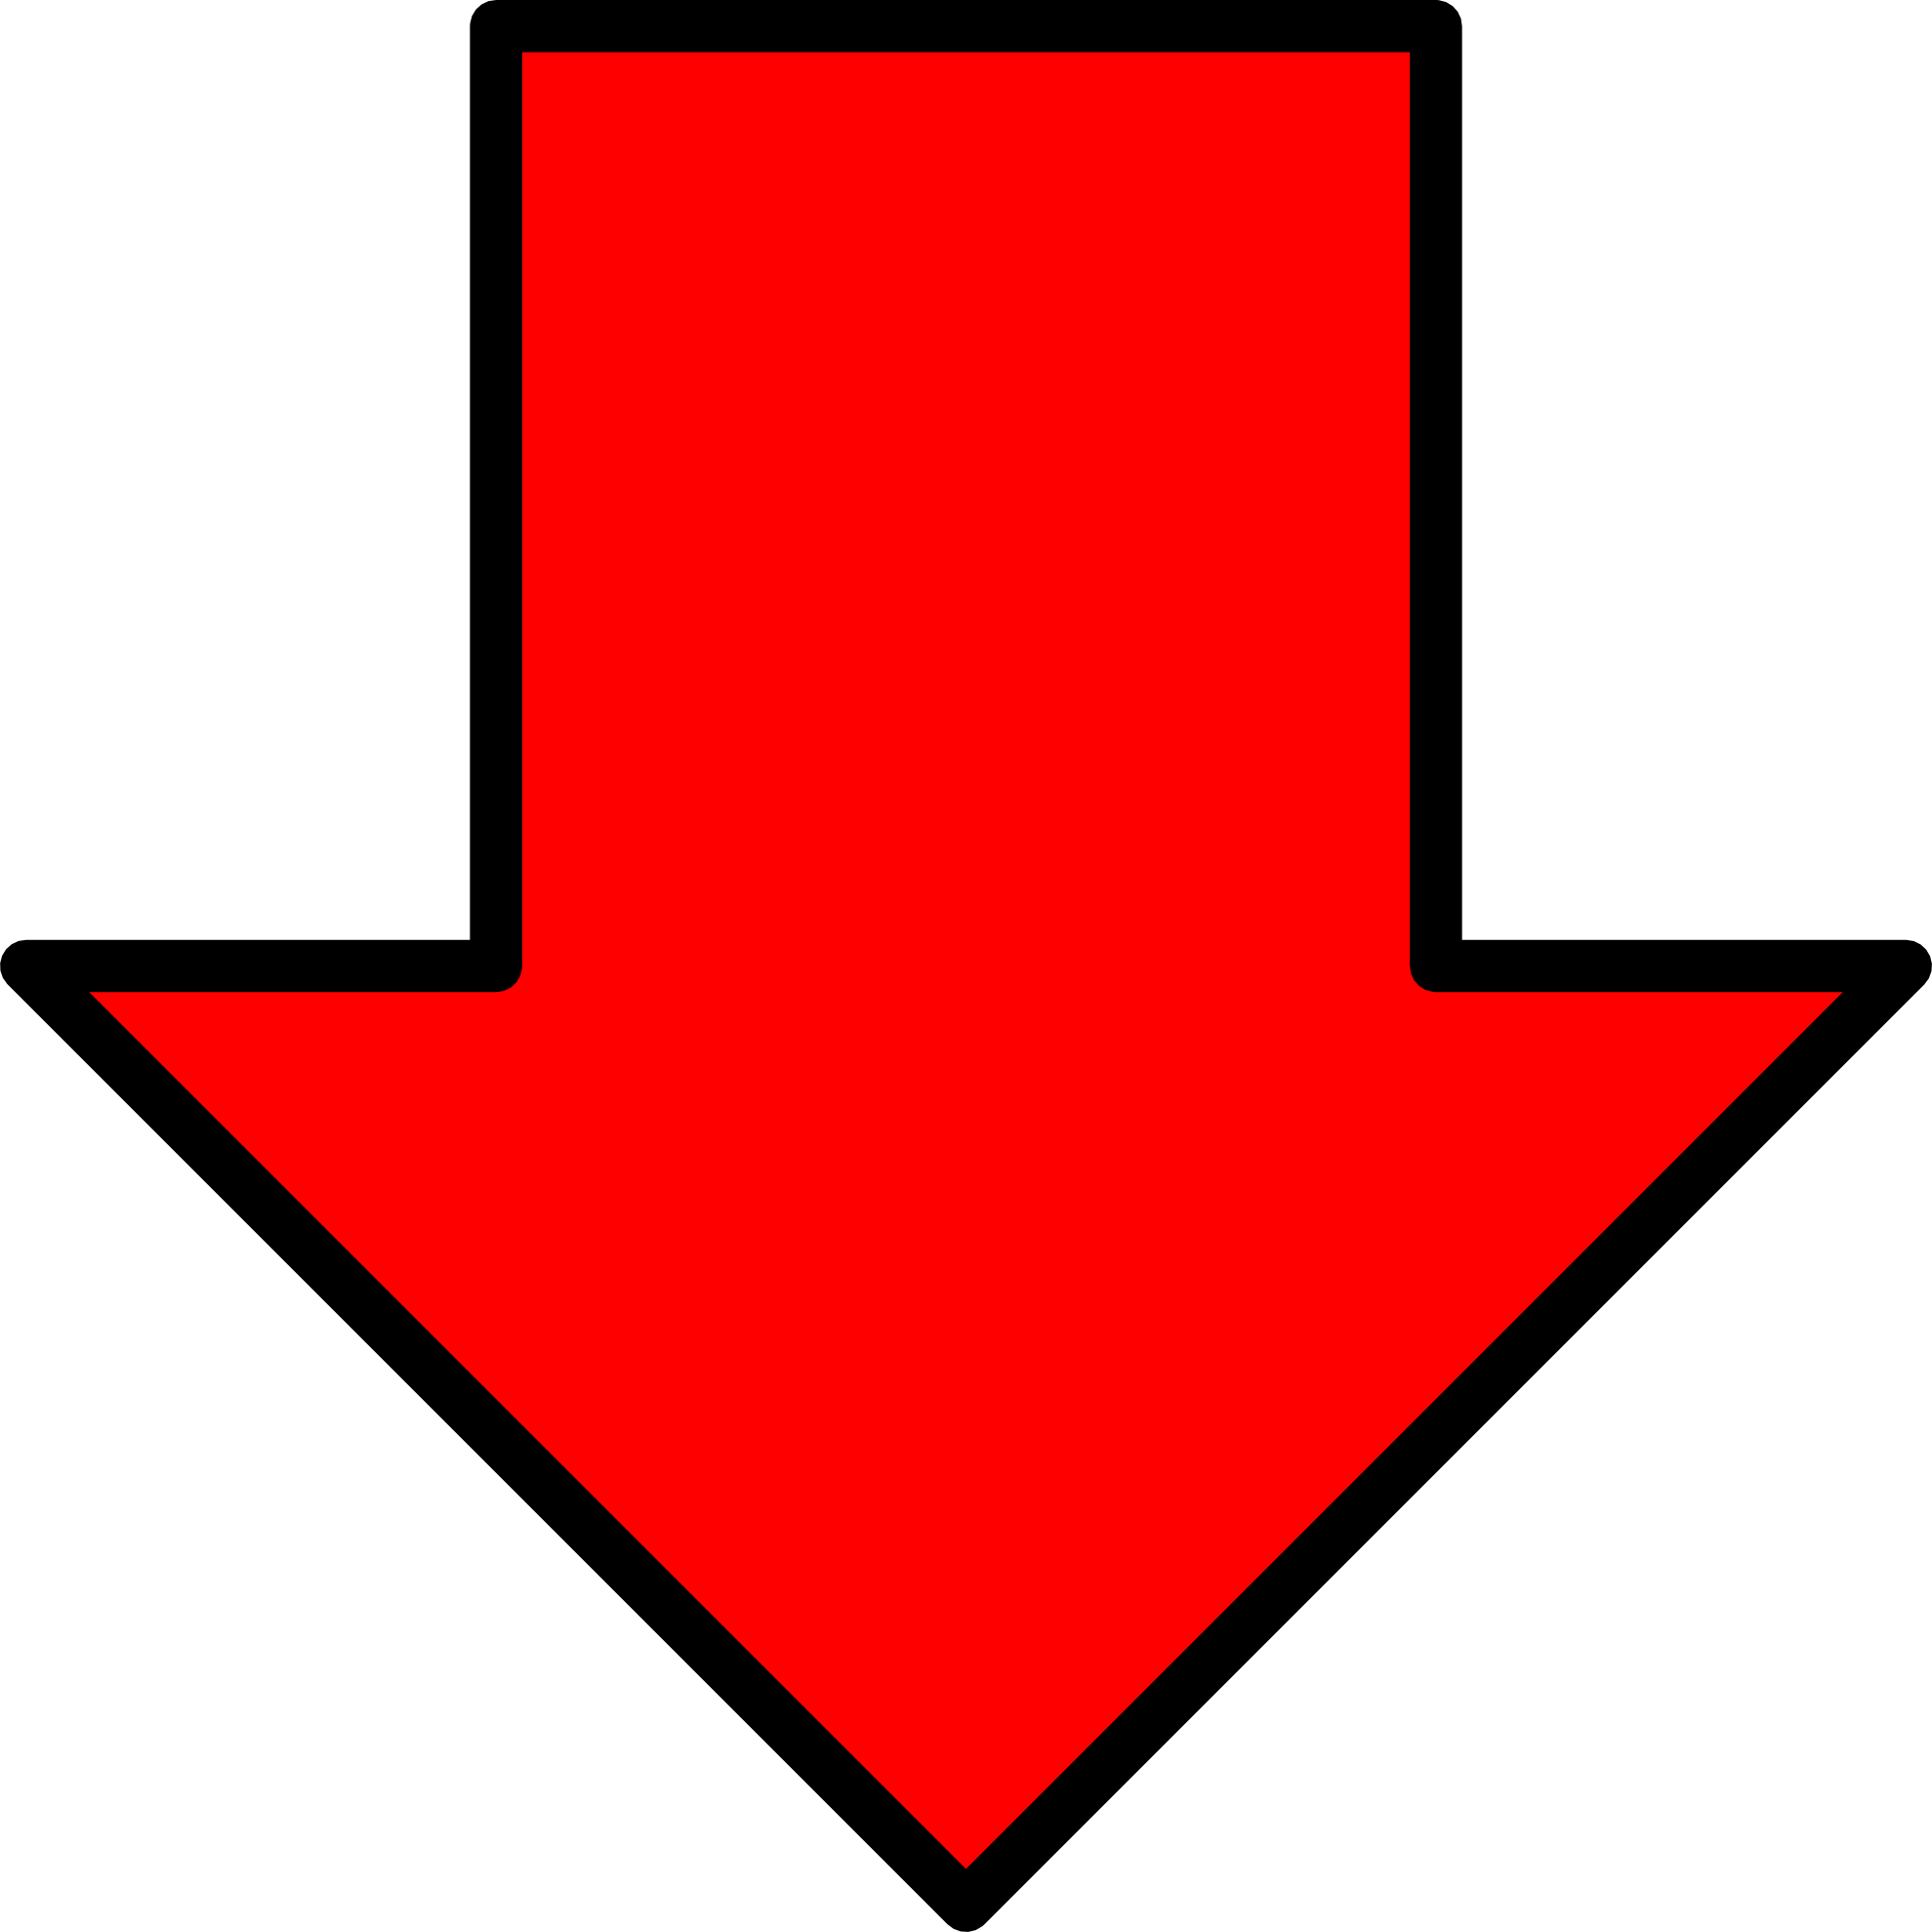 15 Red Arrow Down Png   Free Cliparts That You Can Download To You